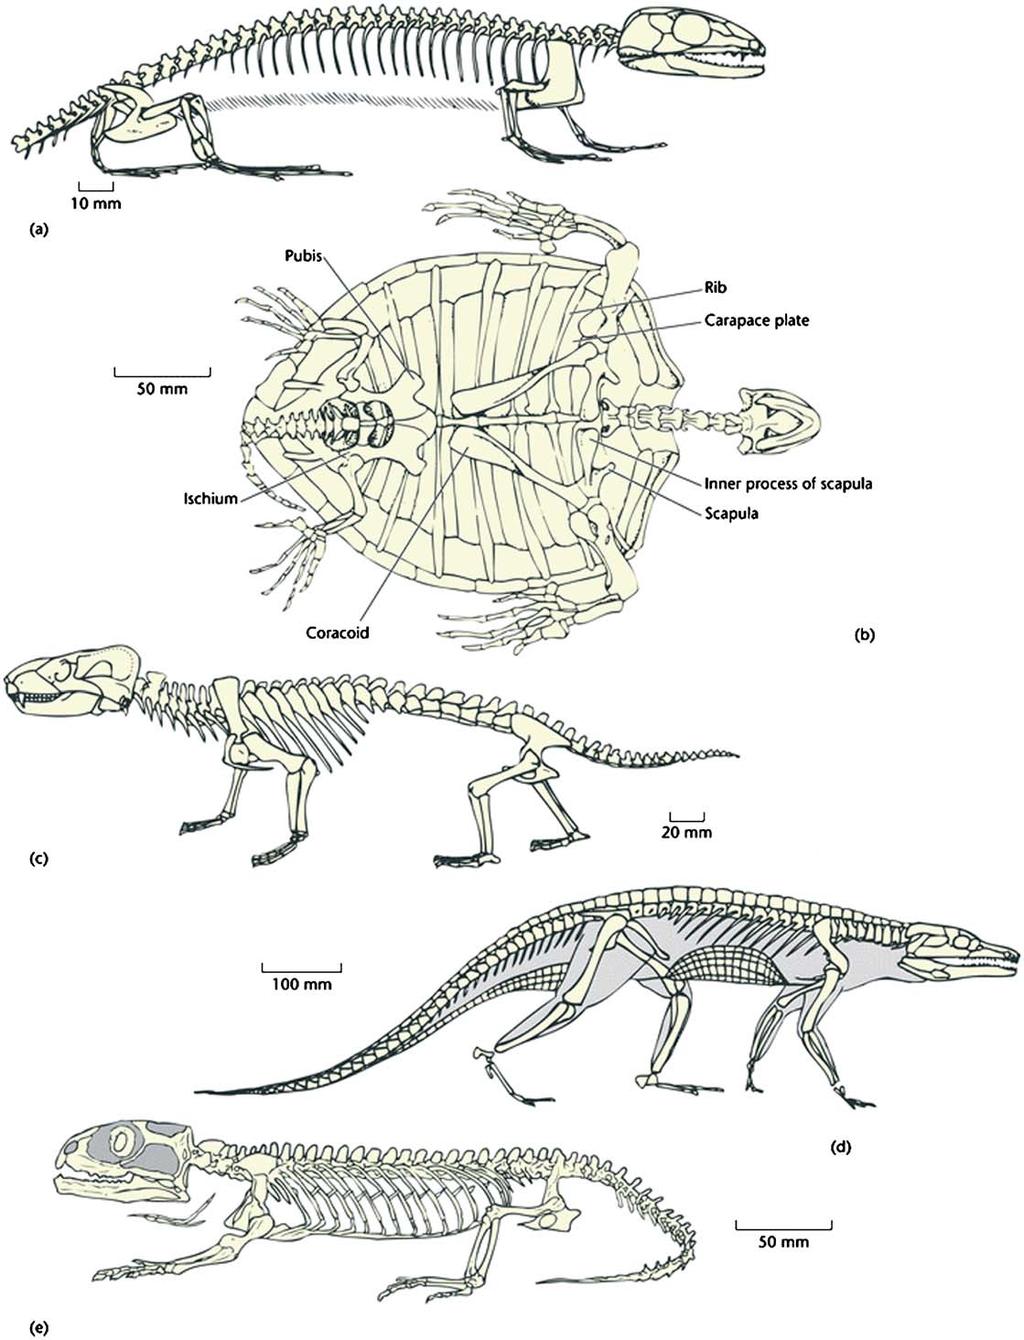 004126:f0002 Figure 2 Basic design of a diversity of reptiles. (a) The basal amniote Paleothyris, from the Mid Carboniferous of Canada.